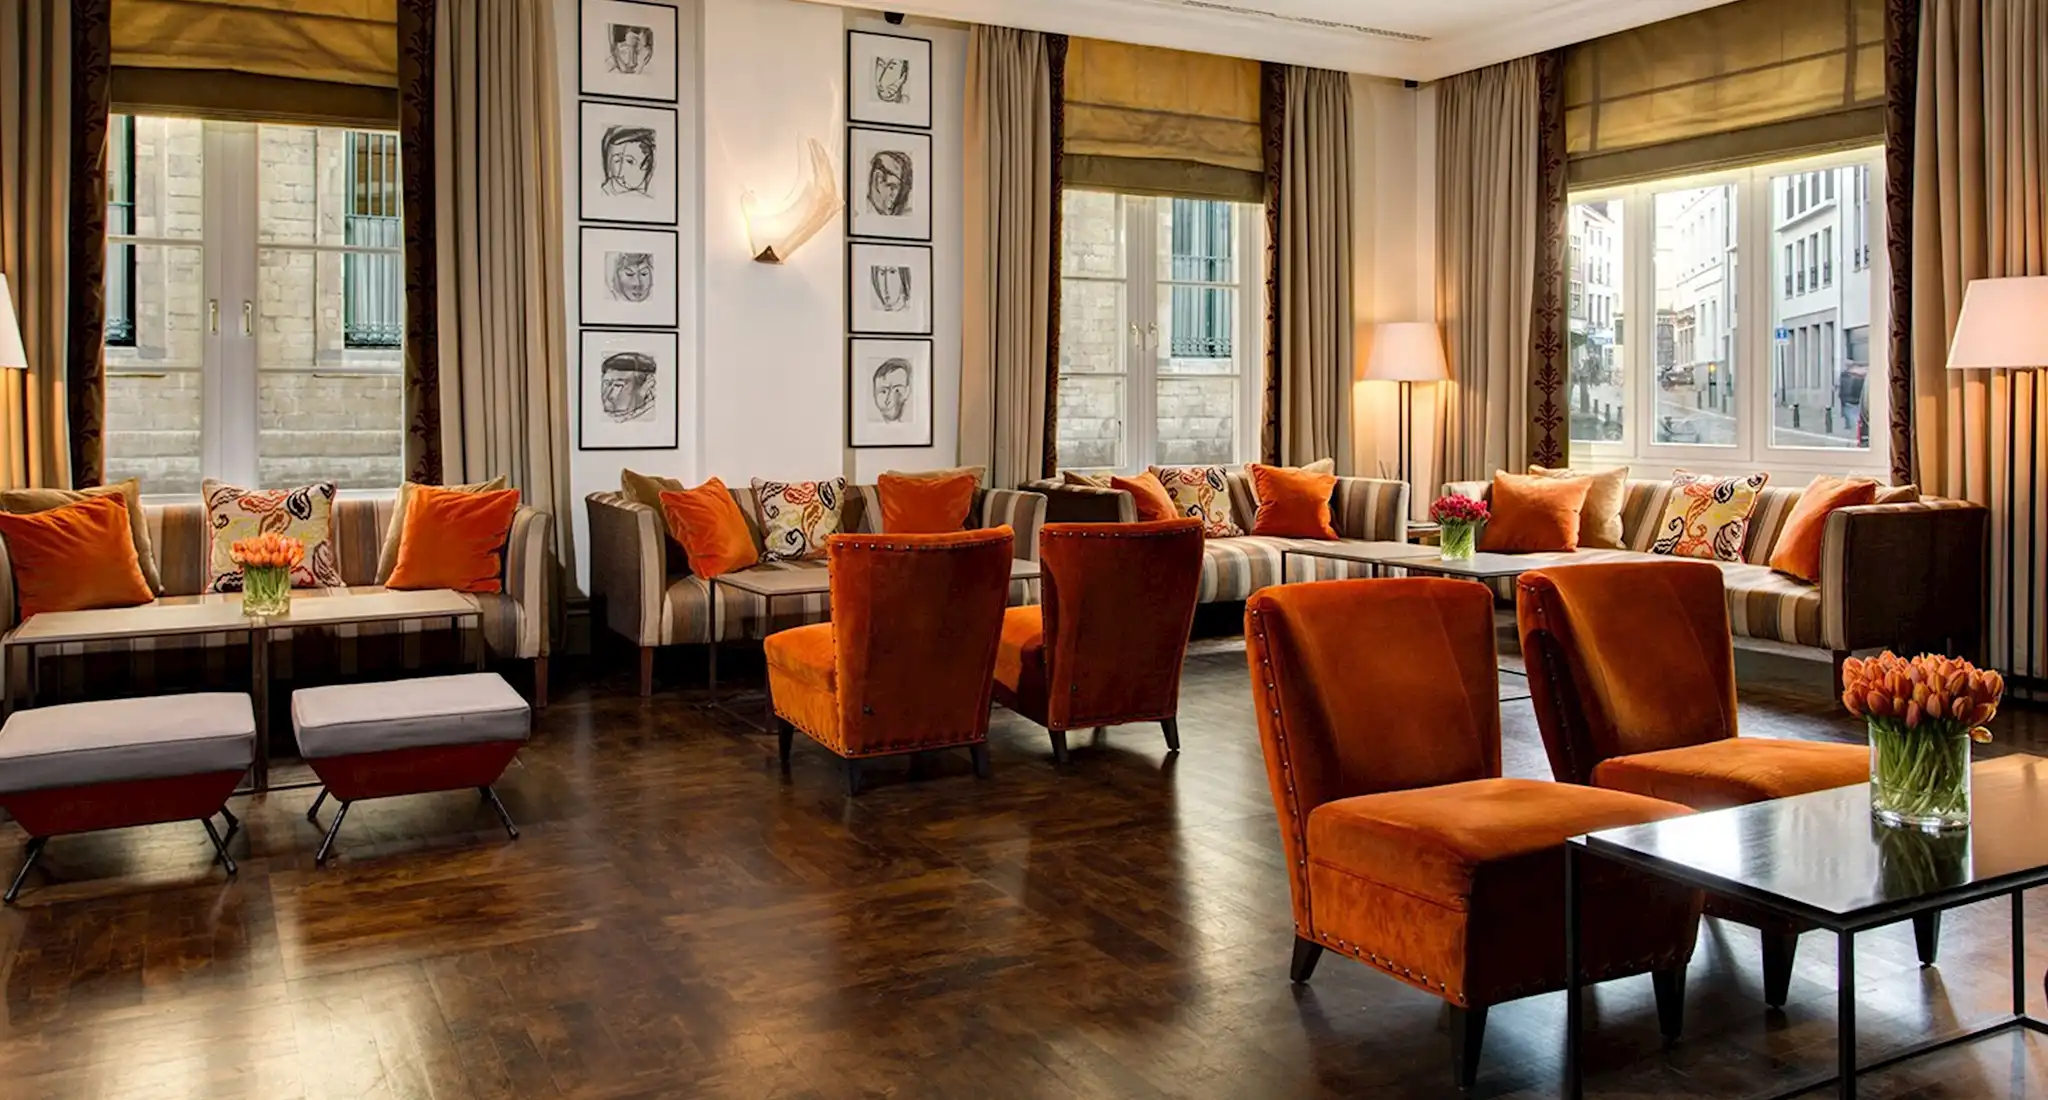 the lobby of amigo hotels in brussels features orange chairs and tables, creating a warm and inviting atmosphere.